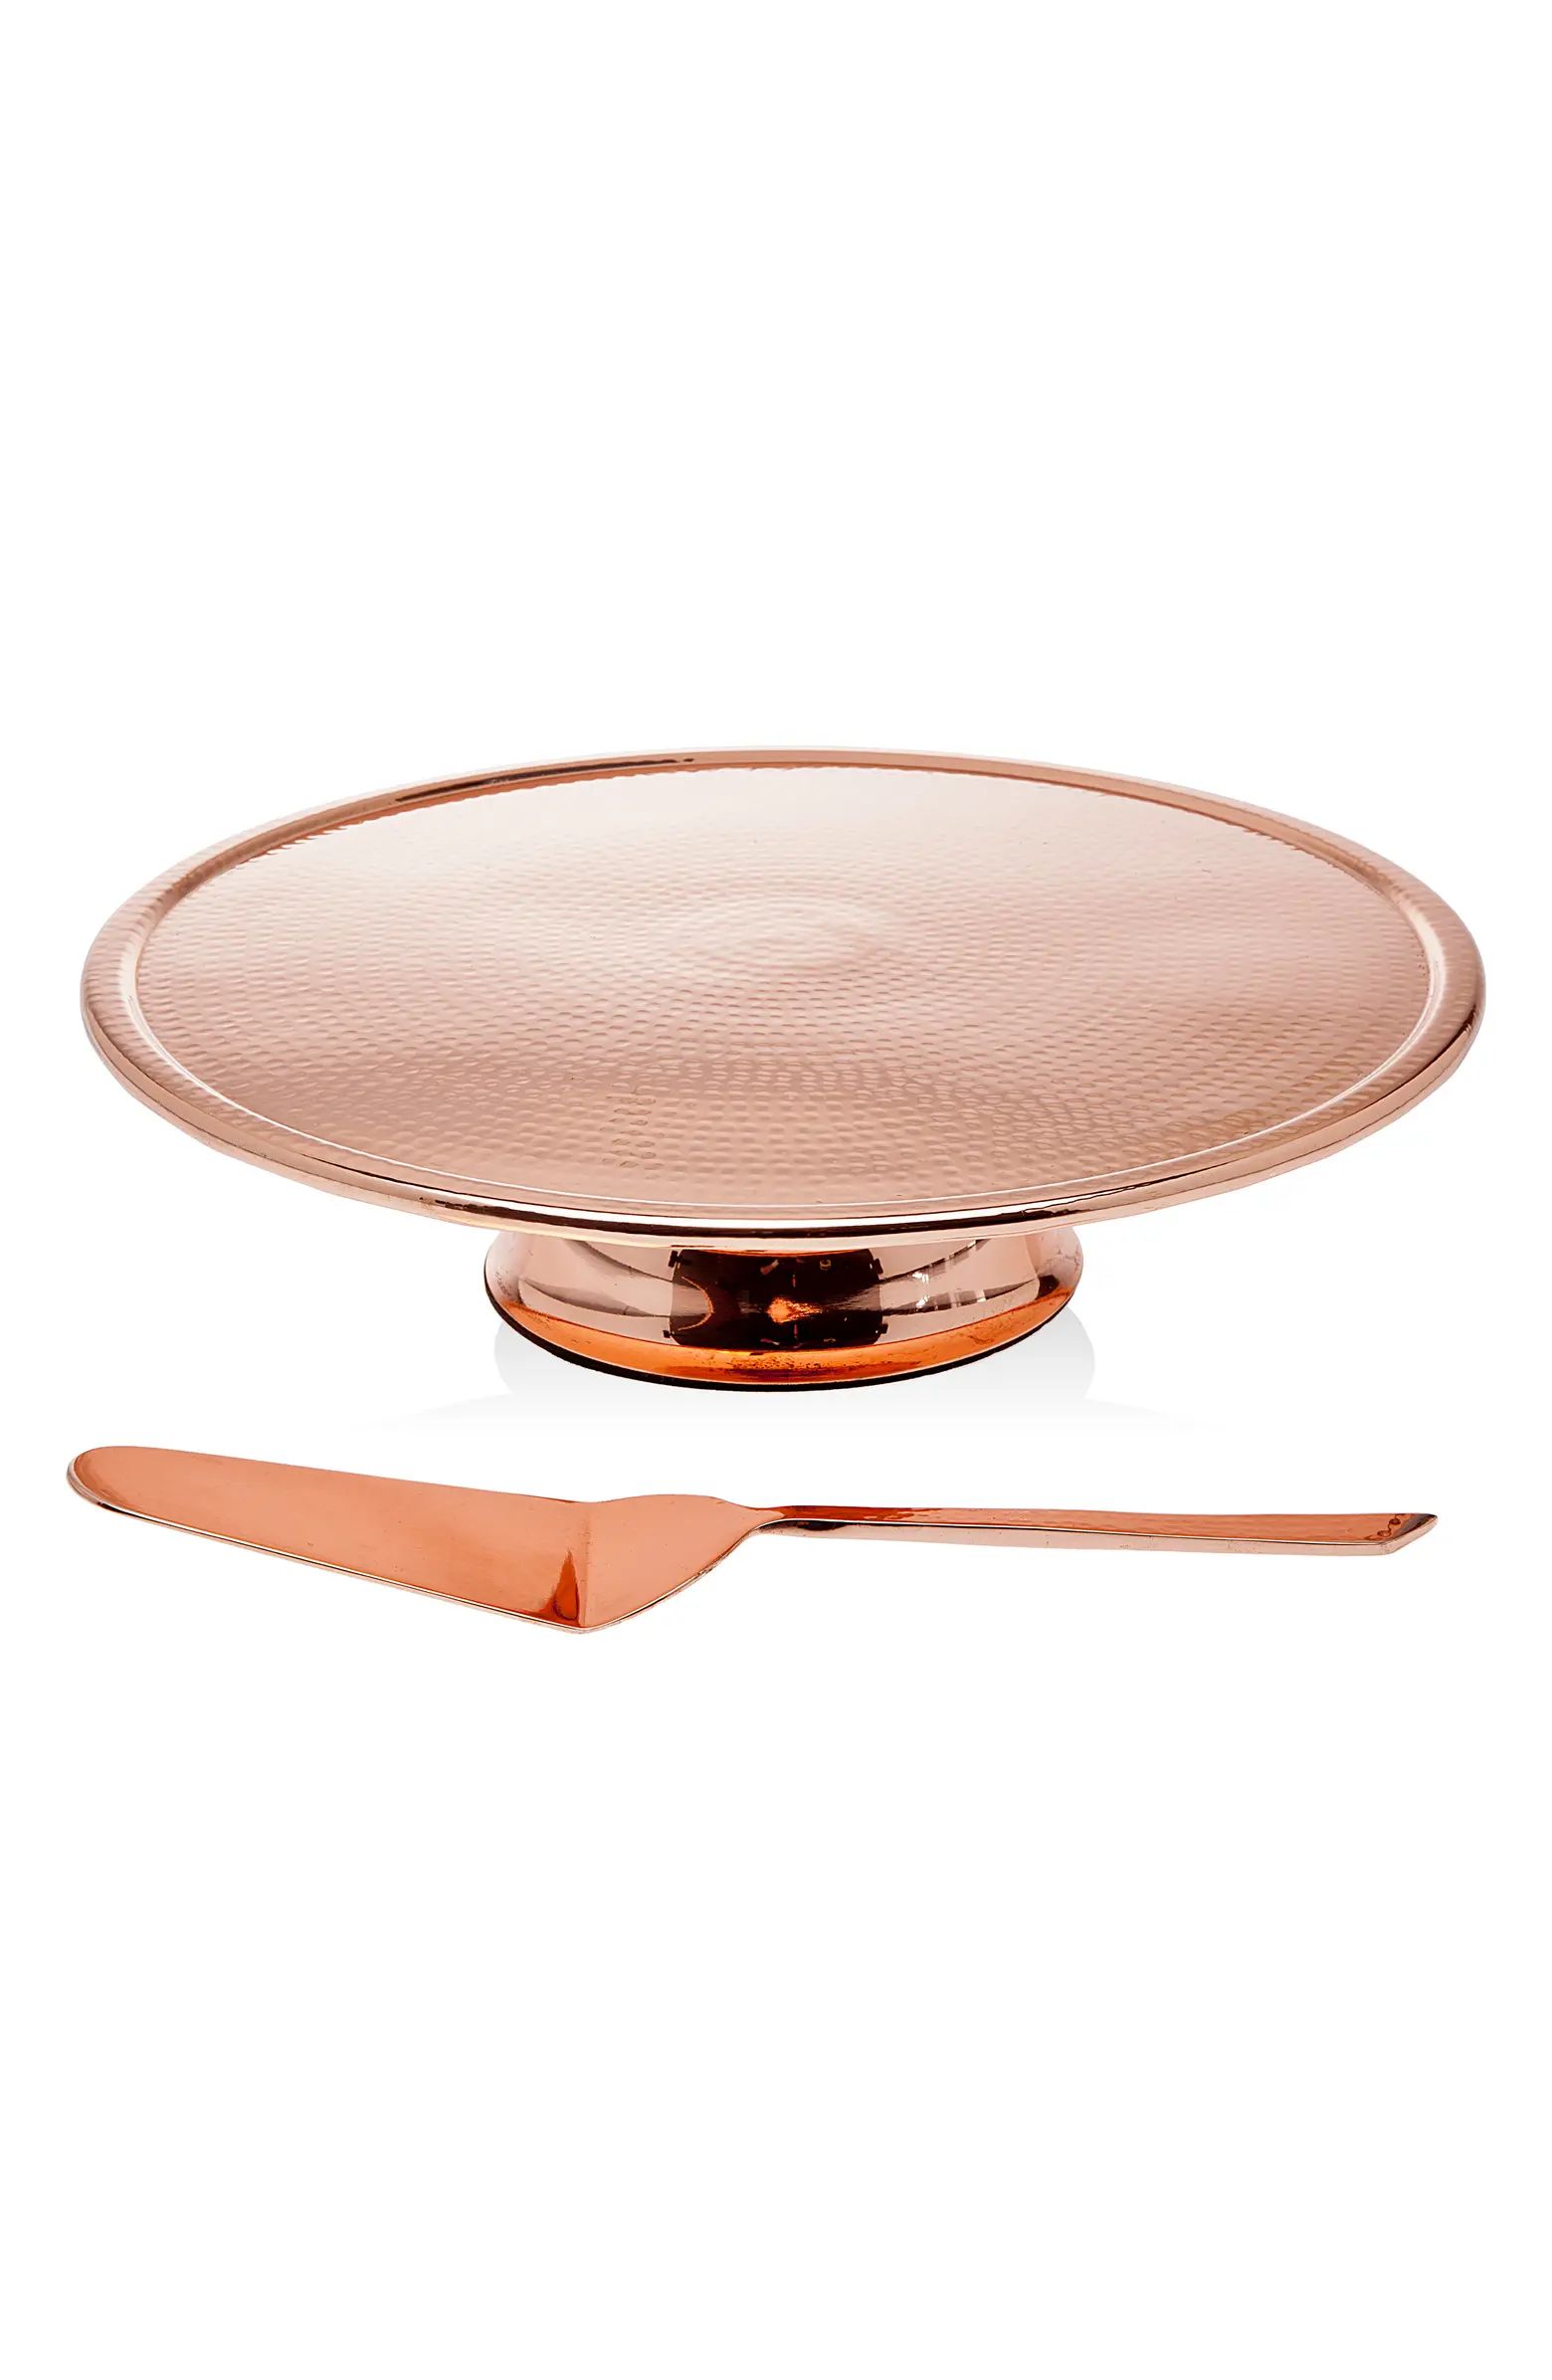 Copper Finish Cake Stand | Nordstrom